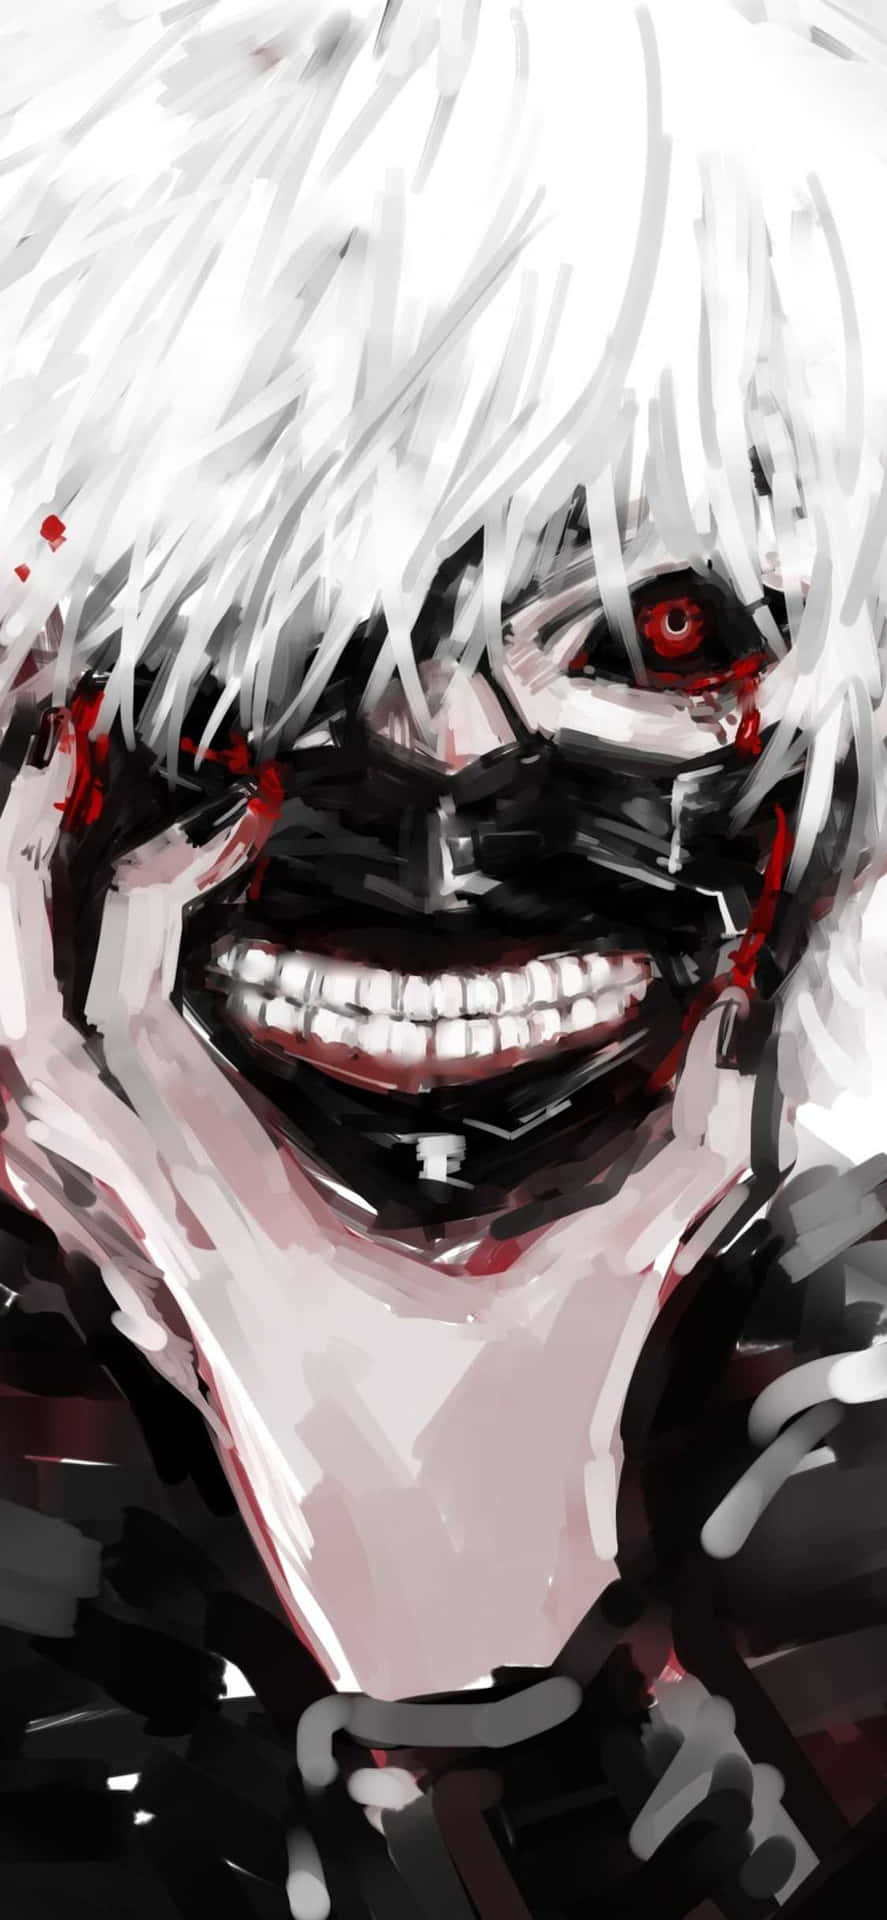 Get the latest and greatest with the Kaneki Phone Wallpaper